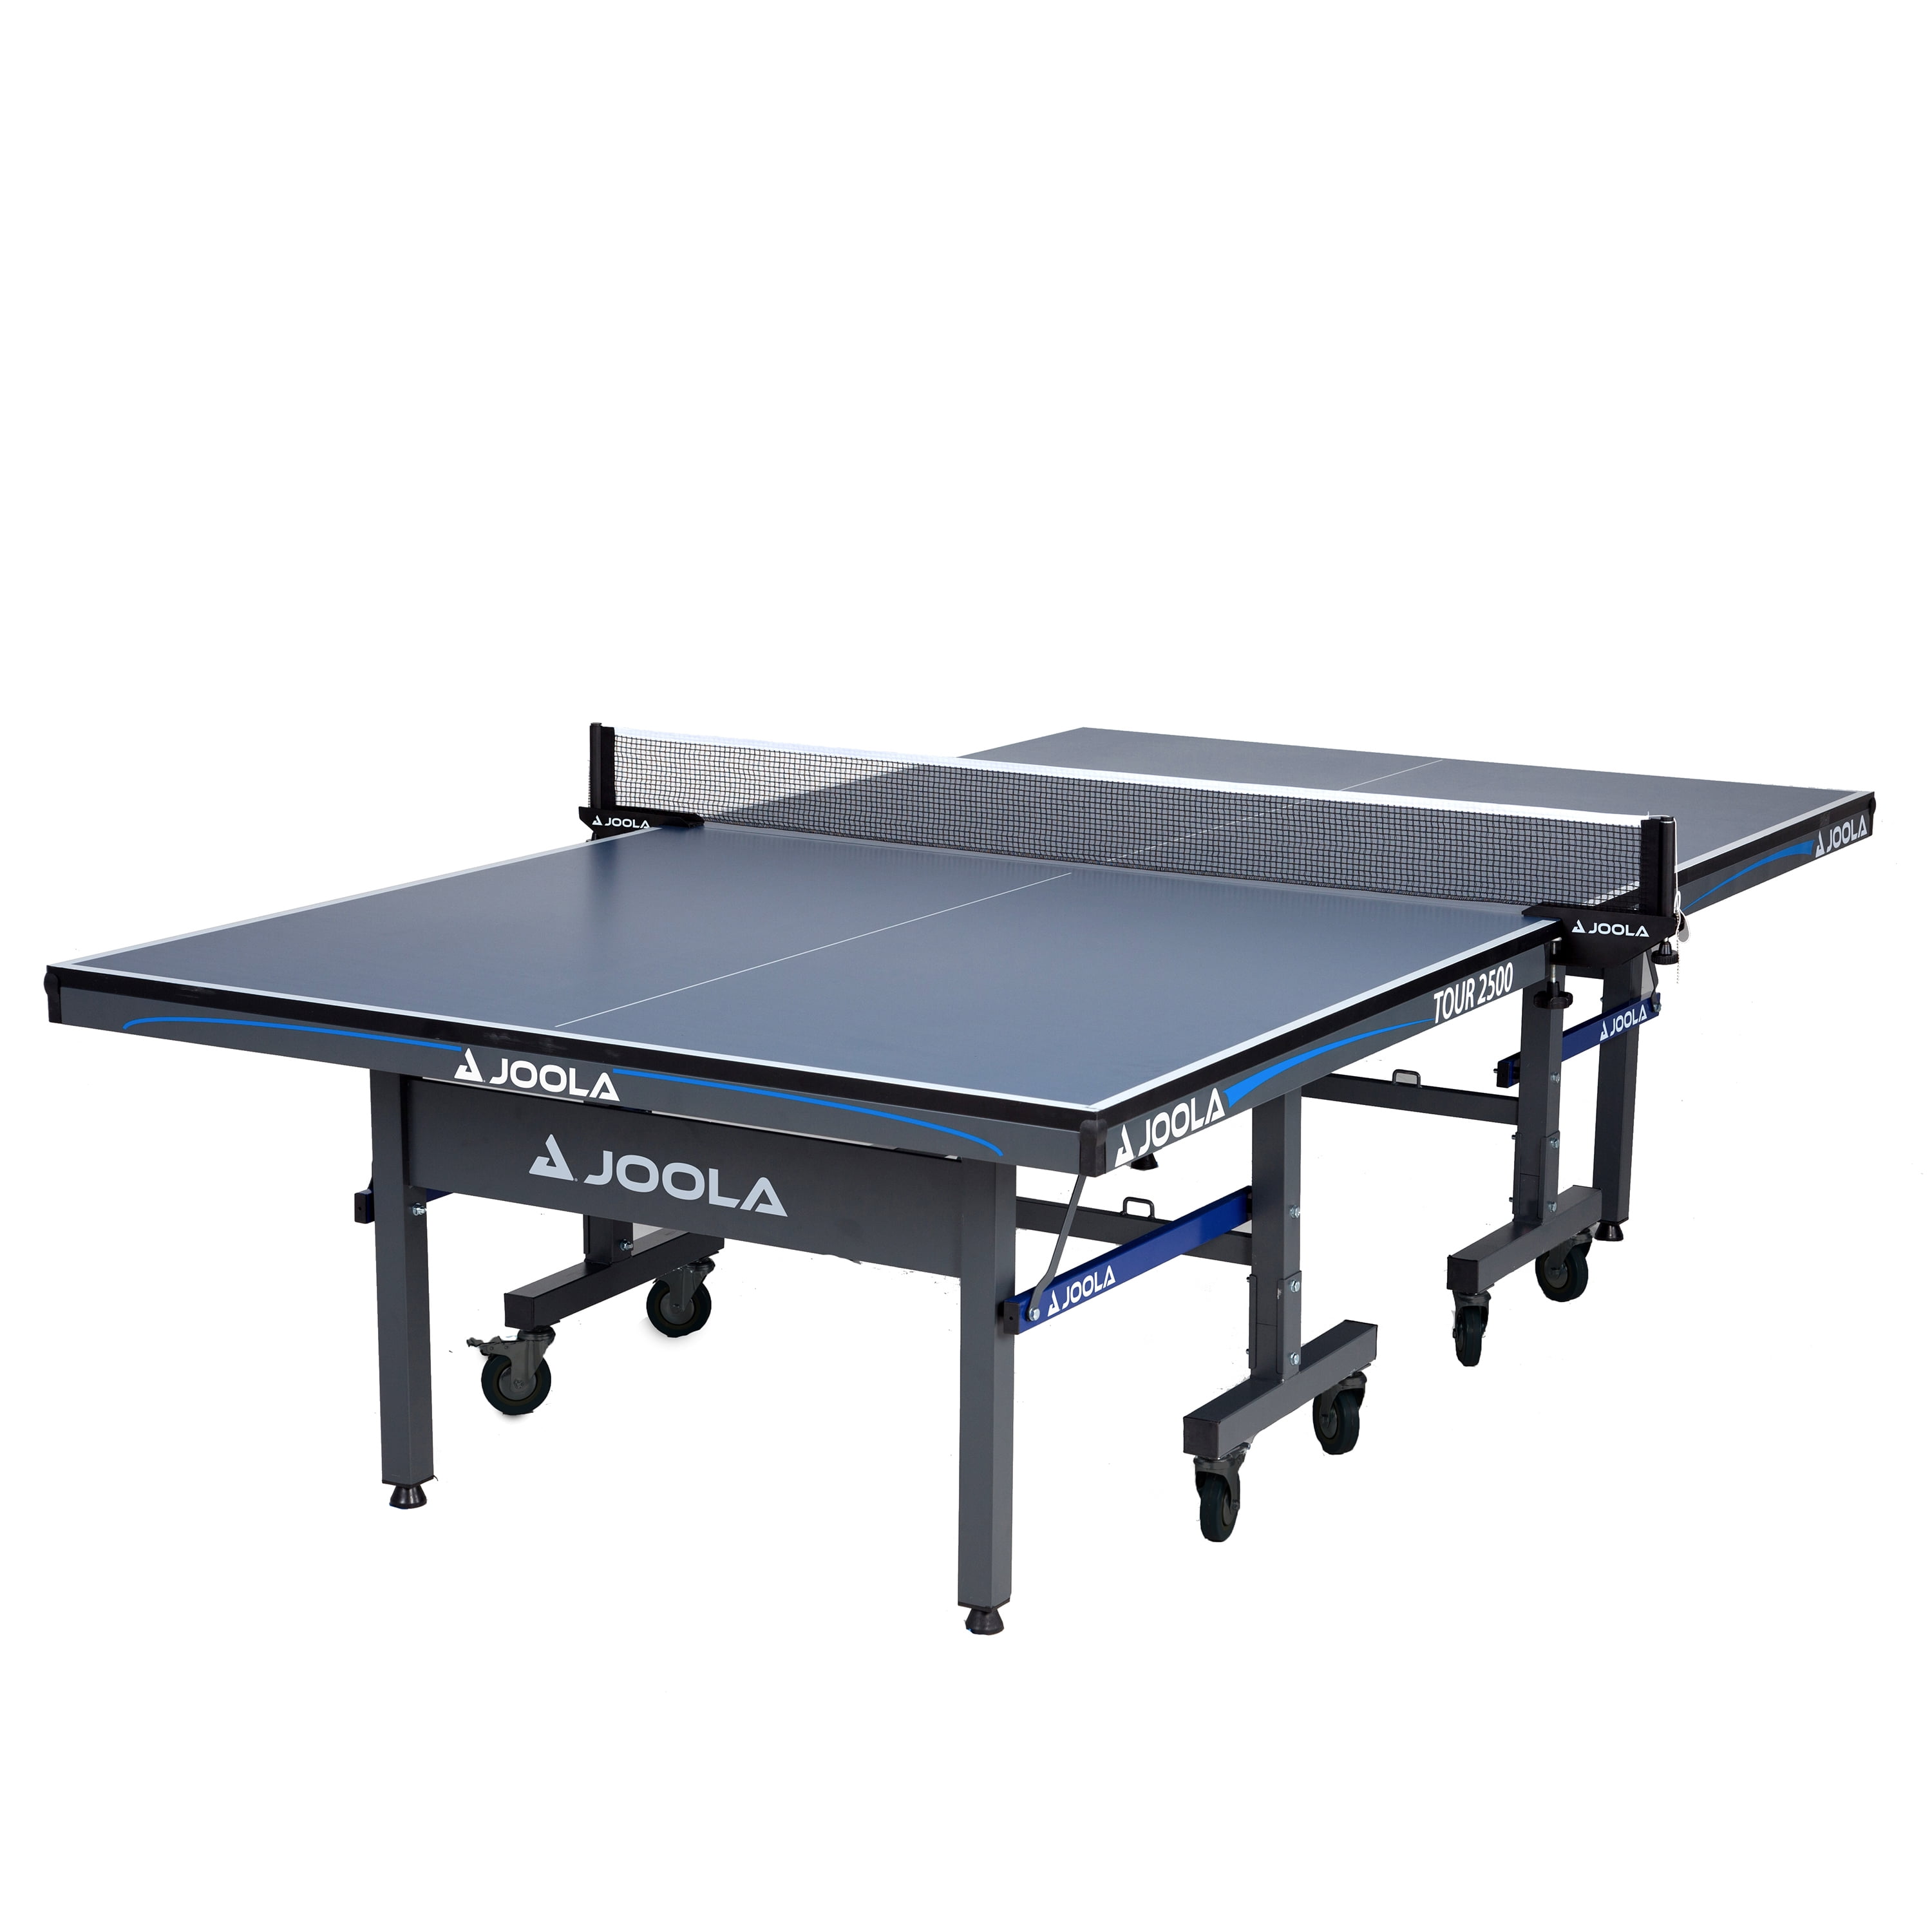 JOOLA Tour 1800 Table Tennis Table with Ping Pong Net Set, 18mm, 9' x 5',  Blue